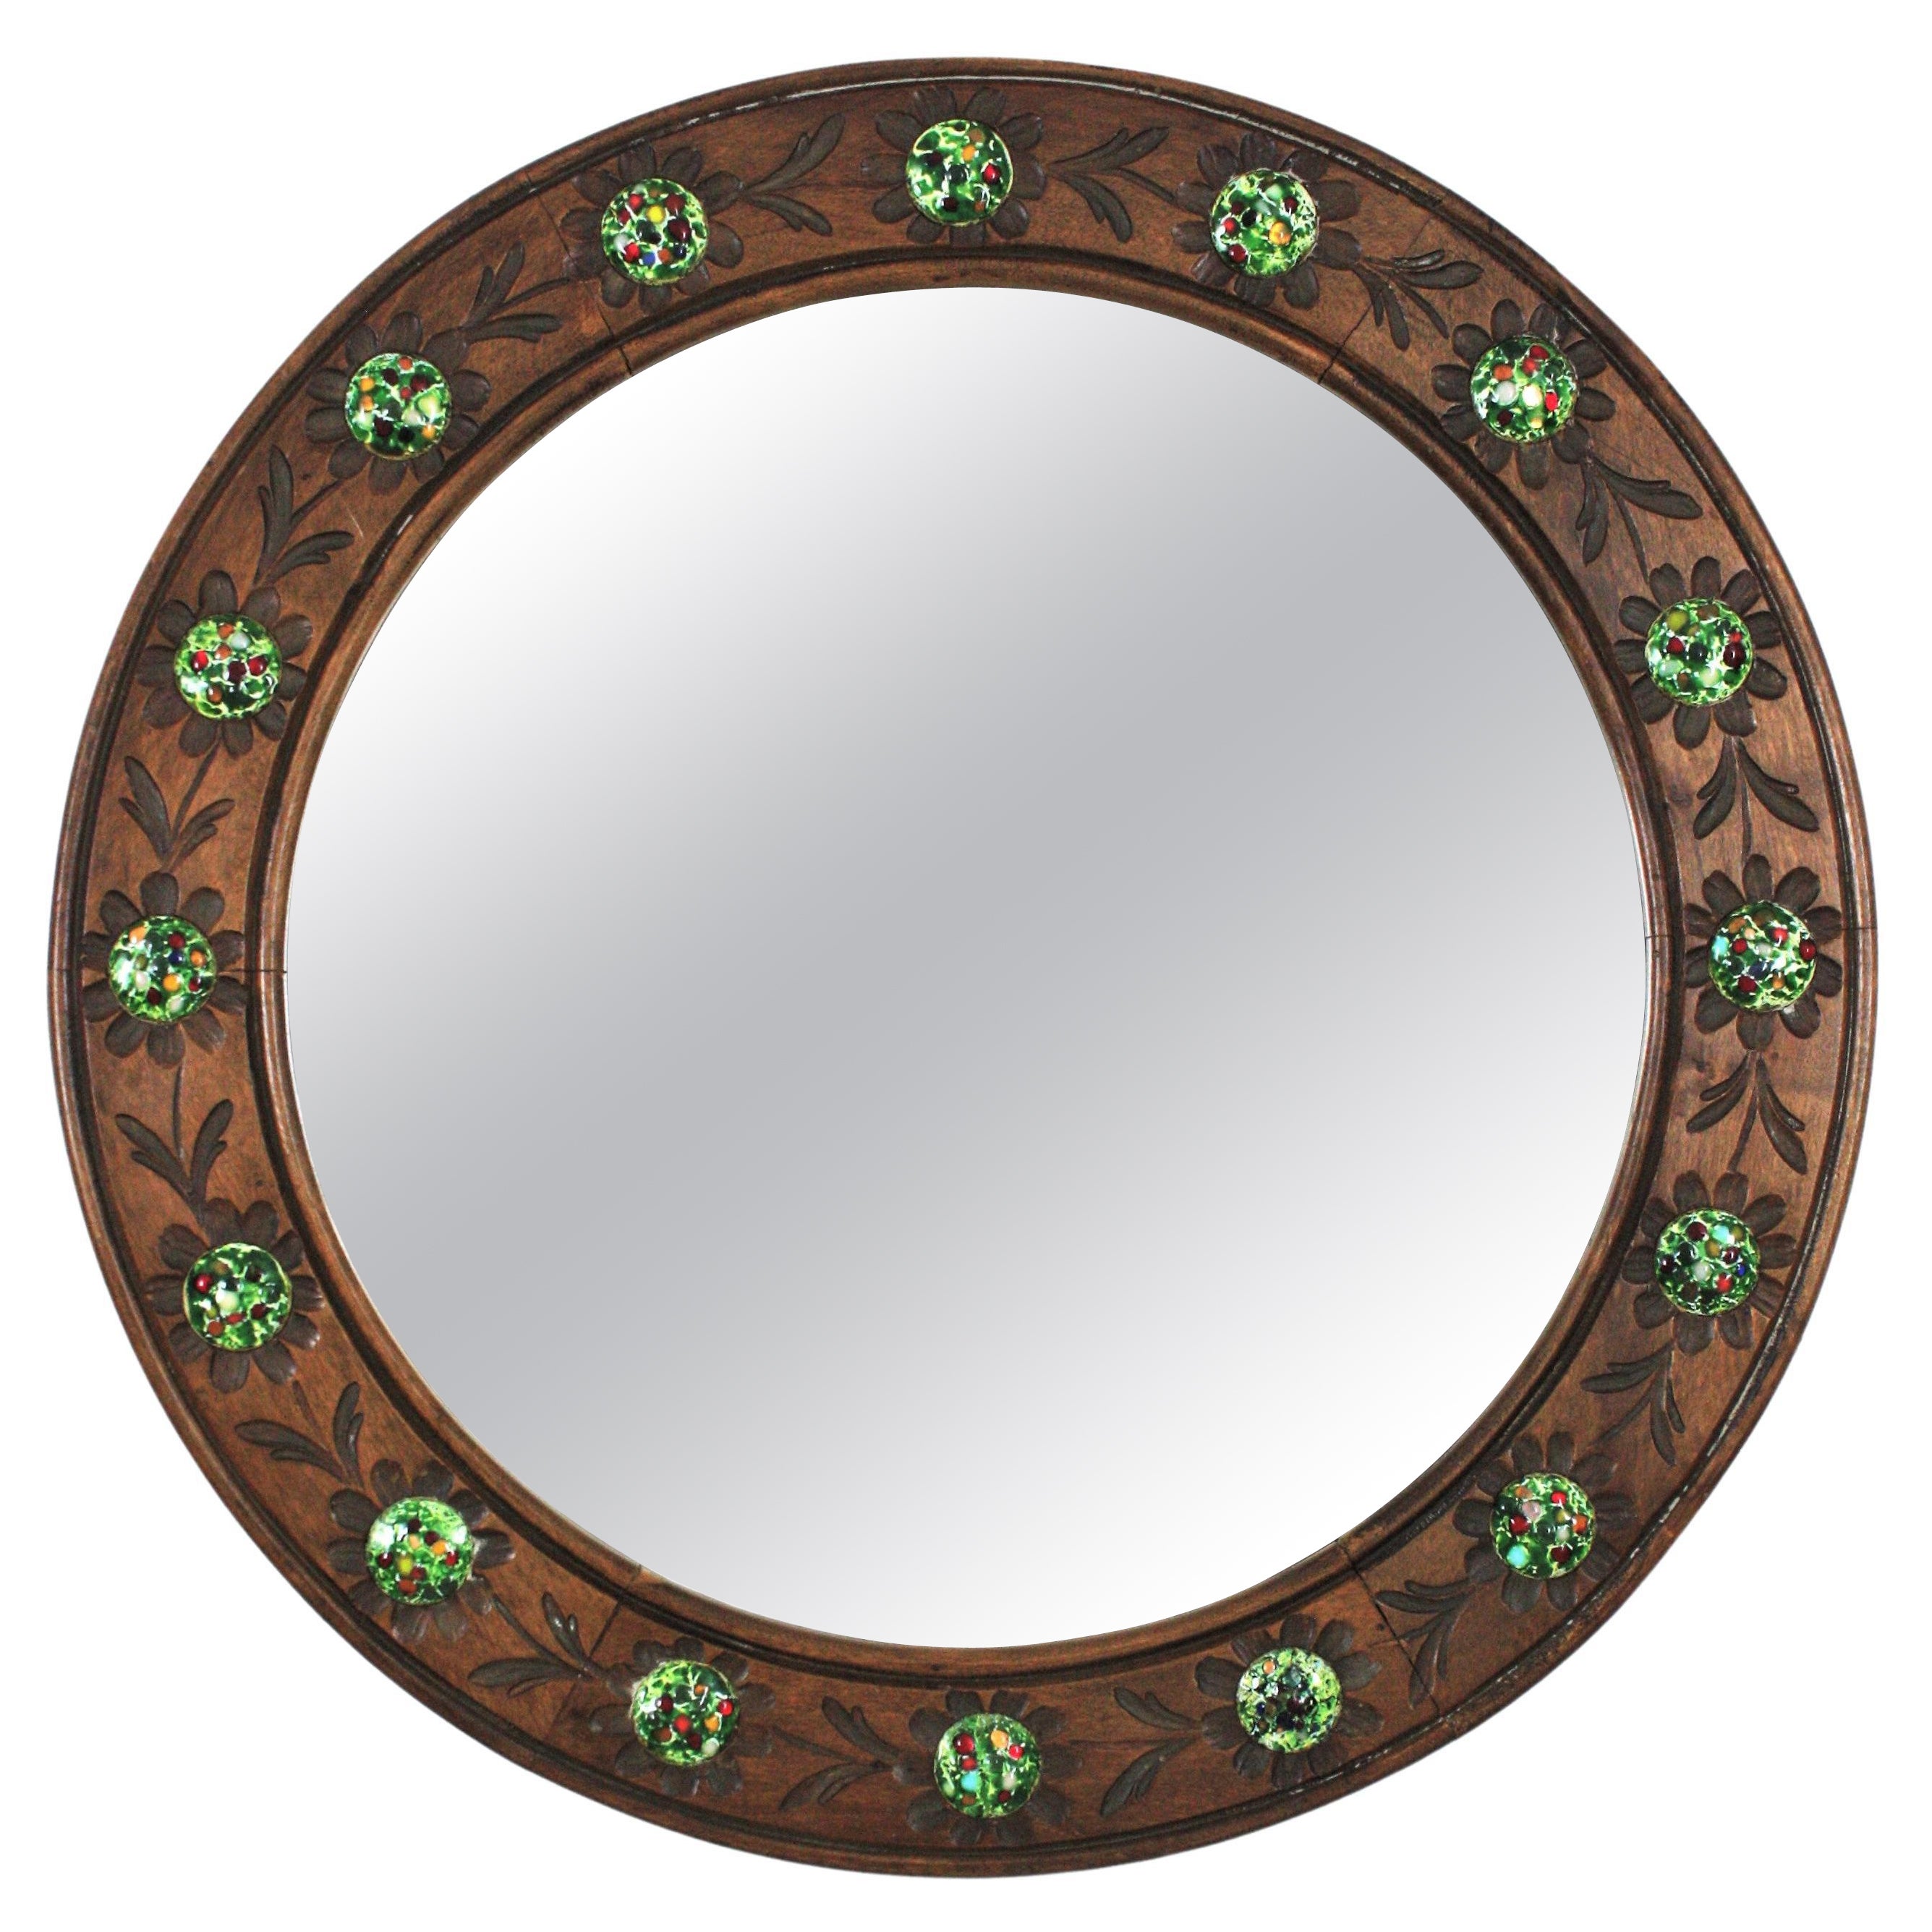 Round Wall Mirror in Walnut and Multi Color Enamel Decorations